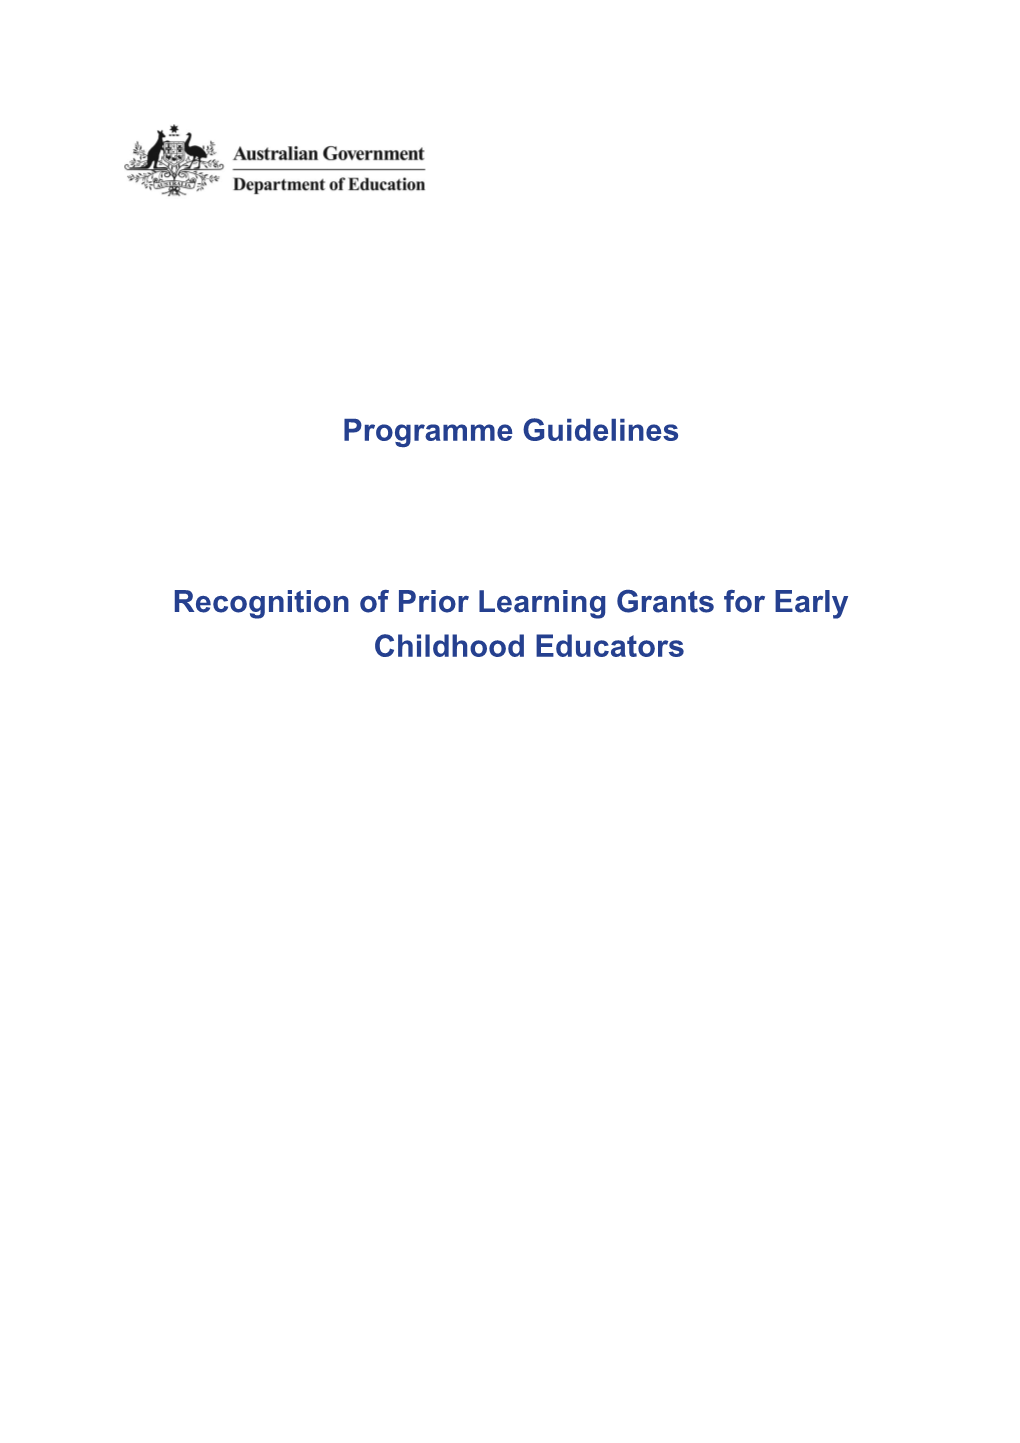 Recognition of Prior Learning Grants for Early Childhood Educators